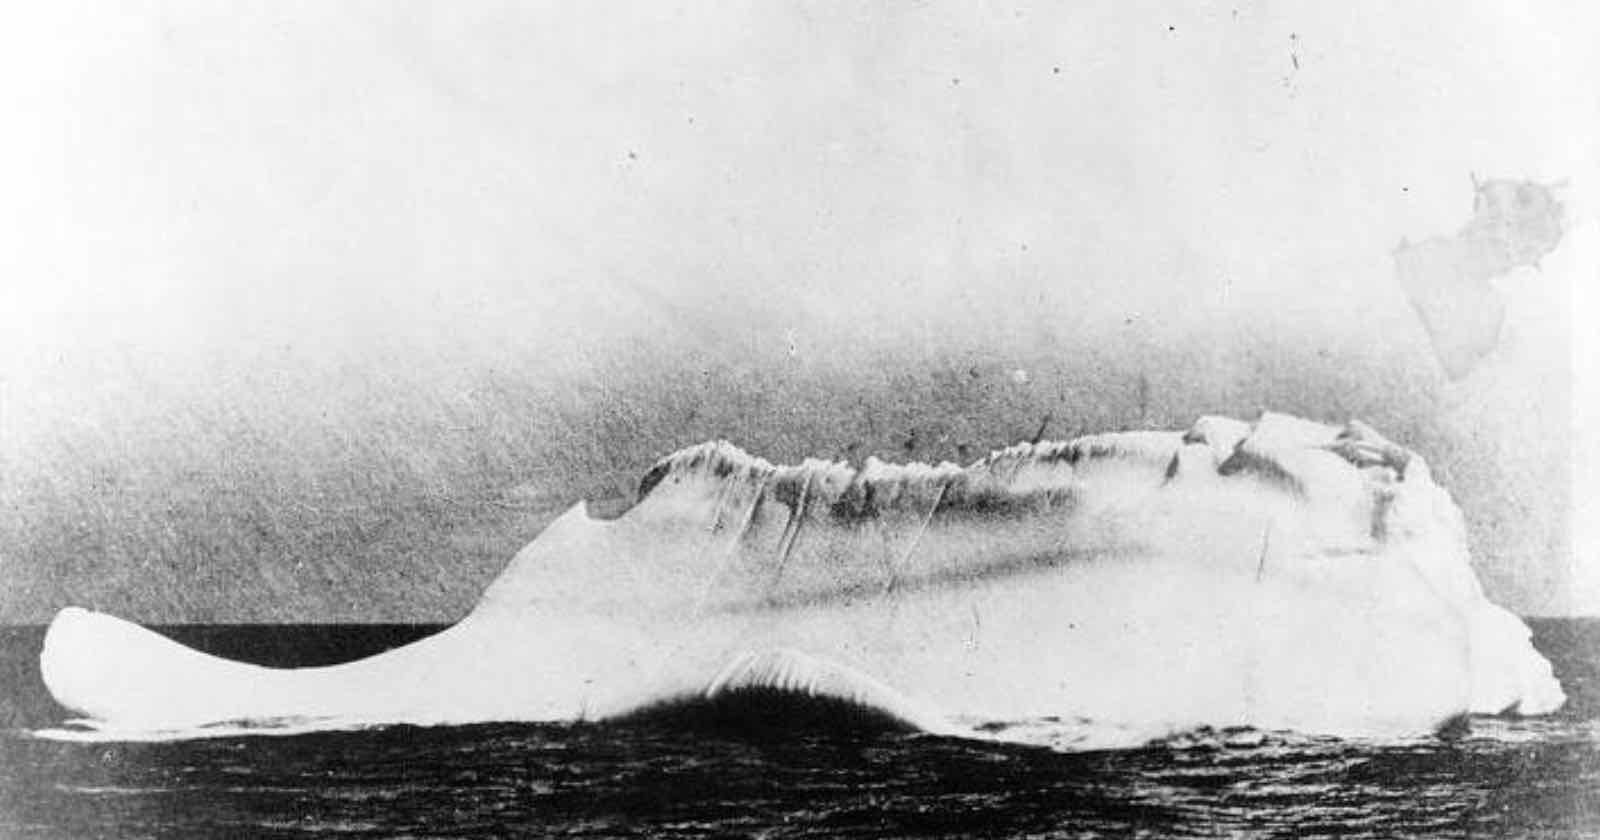  newly-unearthed photo may reveal iceberg sunk 